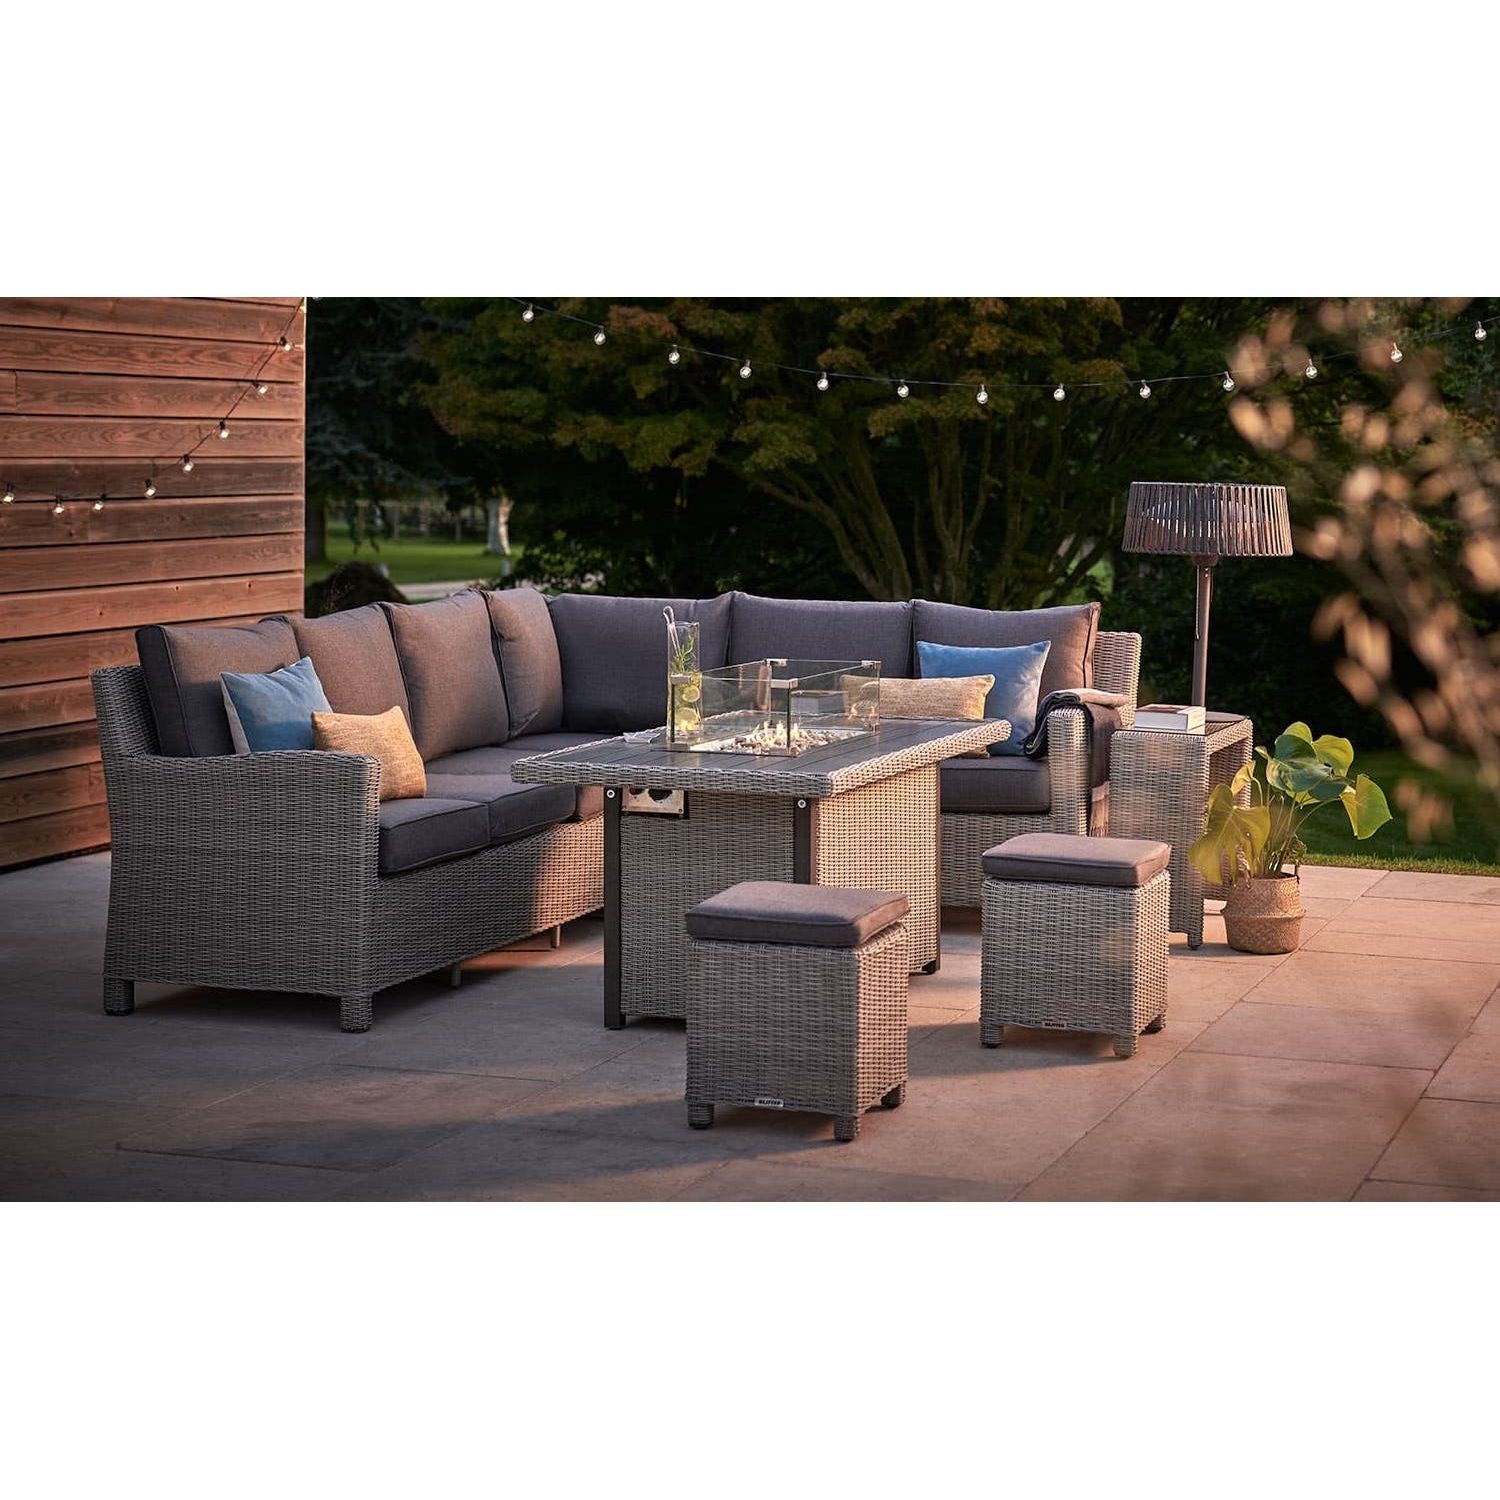 Palma Casual Dining Corner Set Lh, Garden Furniture With Fire Pit In Middle Of Table